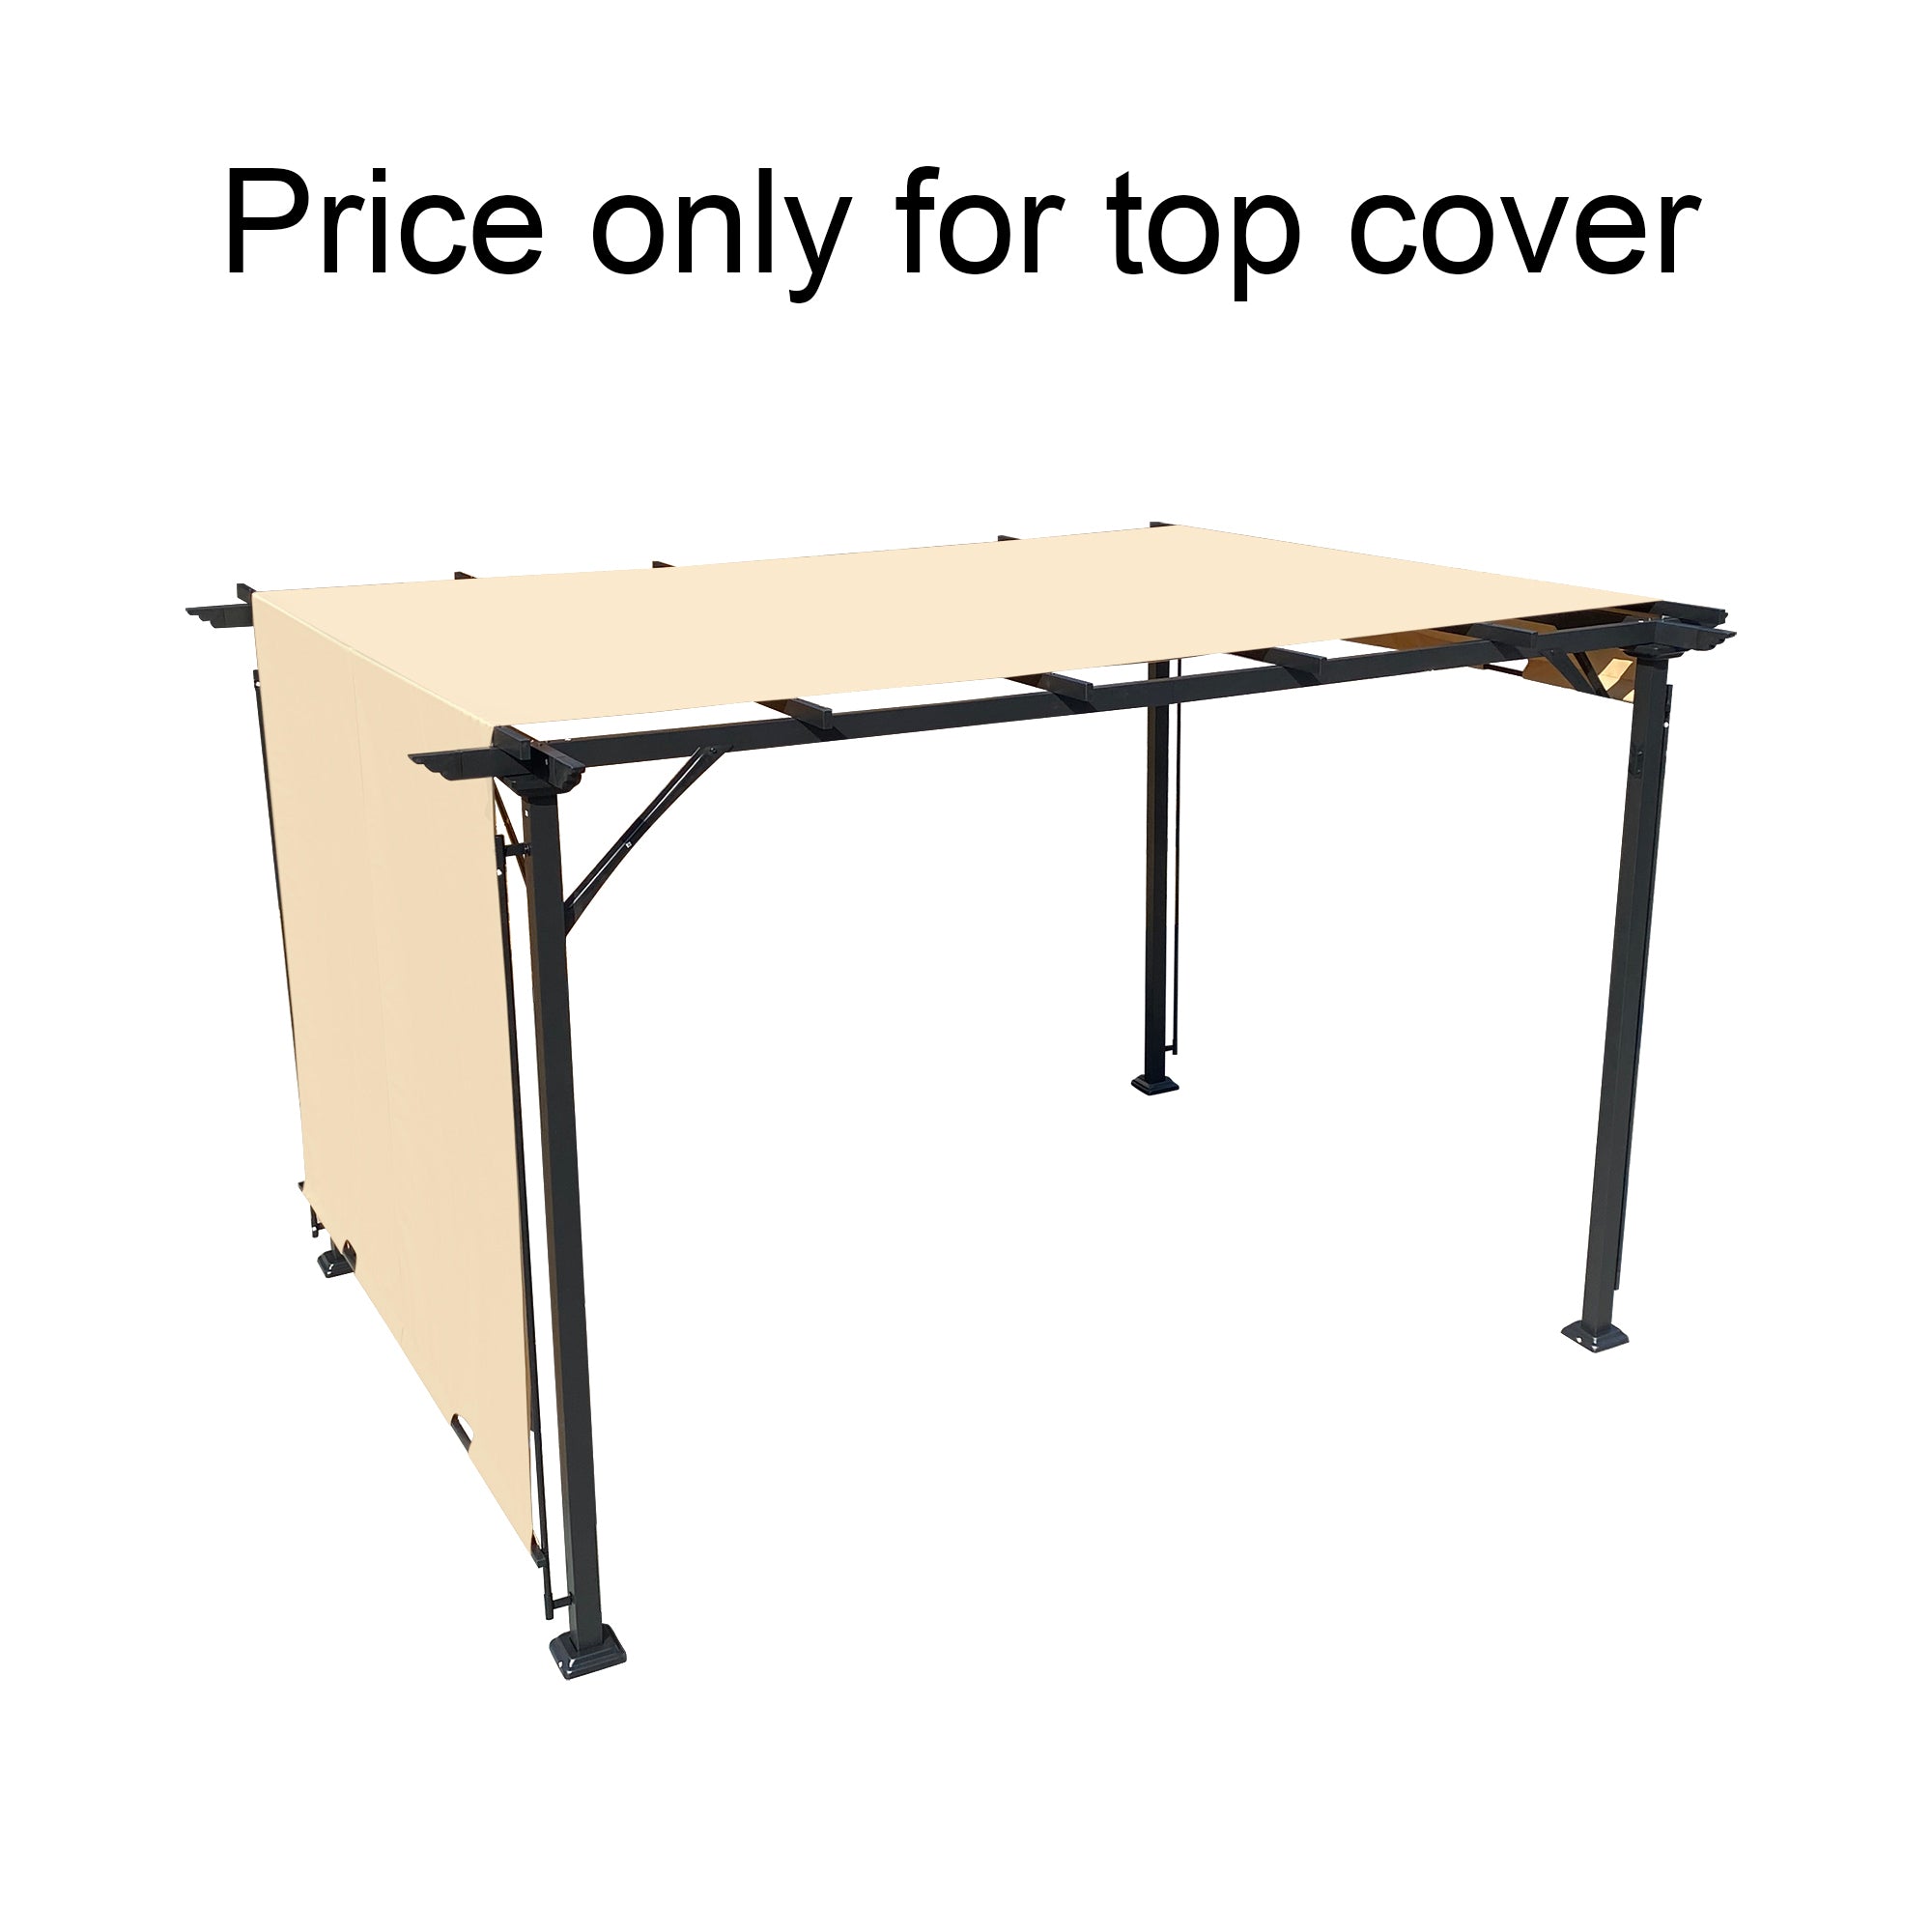 Universal Canopy Cover Replacement for 12x9 Ft Curved khaki-polyester